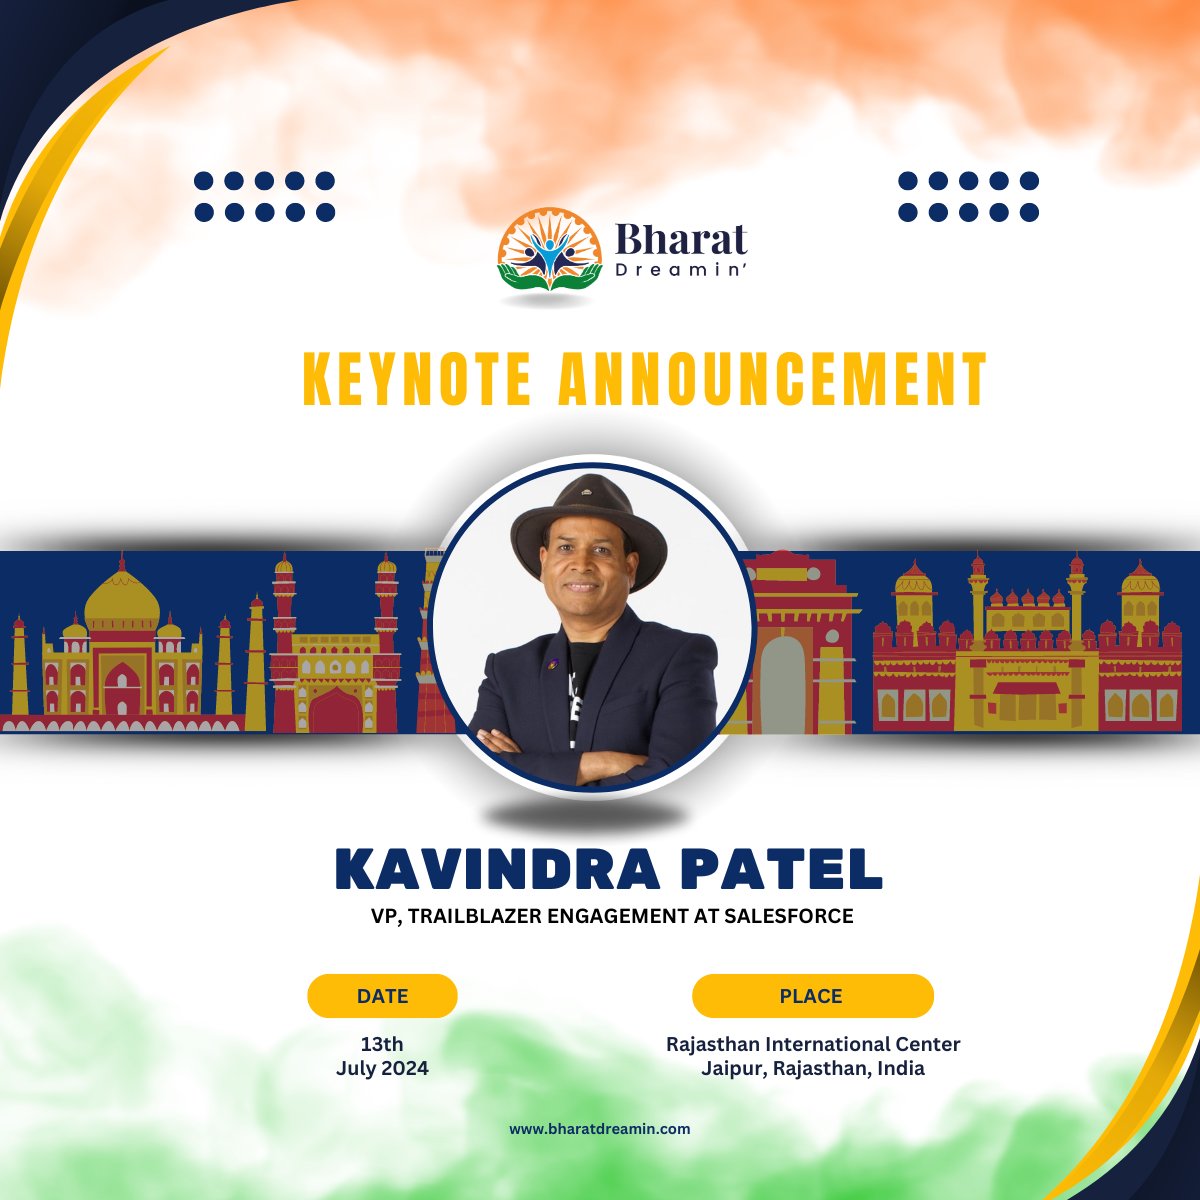 We're thrilled to announce @kavindrapatel as our keynote speaker, where he'll bring his wealth of experience and warmth to inspire and guide us further. Join us as he shares his insights which will undoubtedly leave a lasting impression. #trailblazercommunity #bharatdreamin